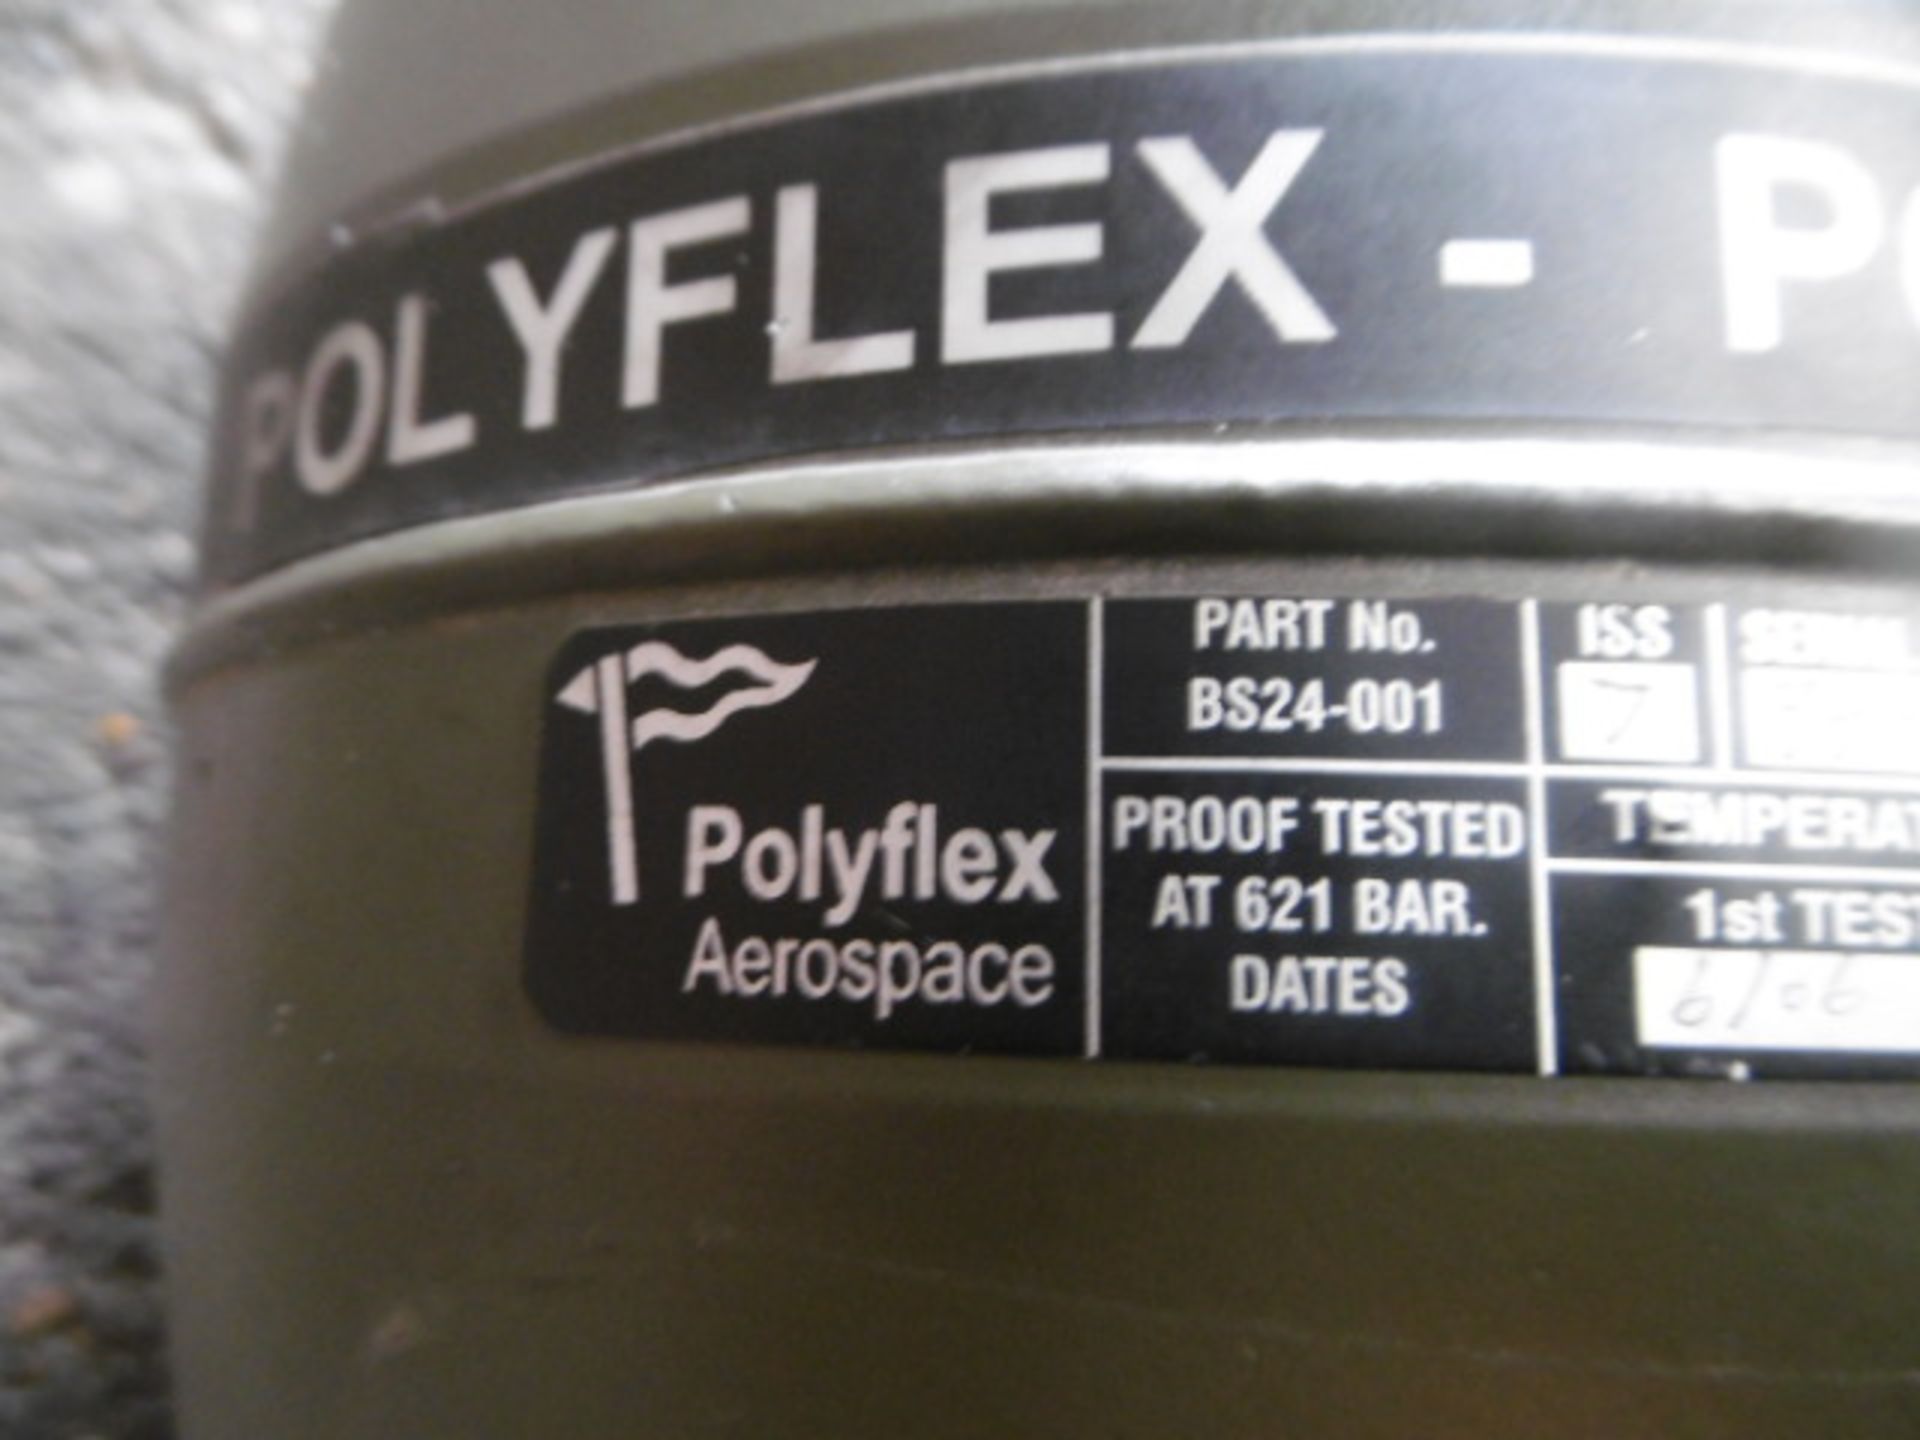 6 x Polyflex High Pressure Air Cannisters - Image 4 of 5